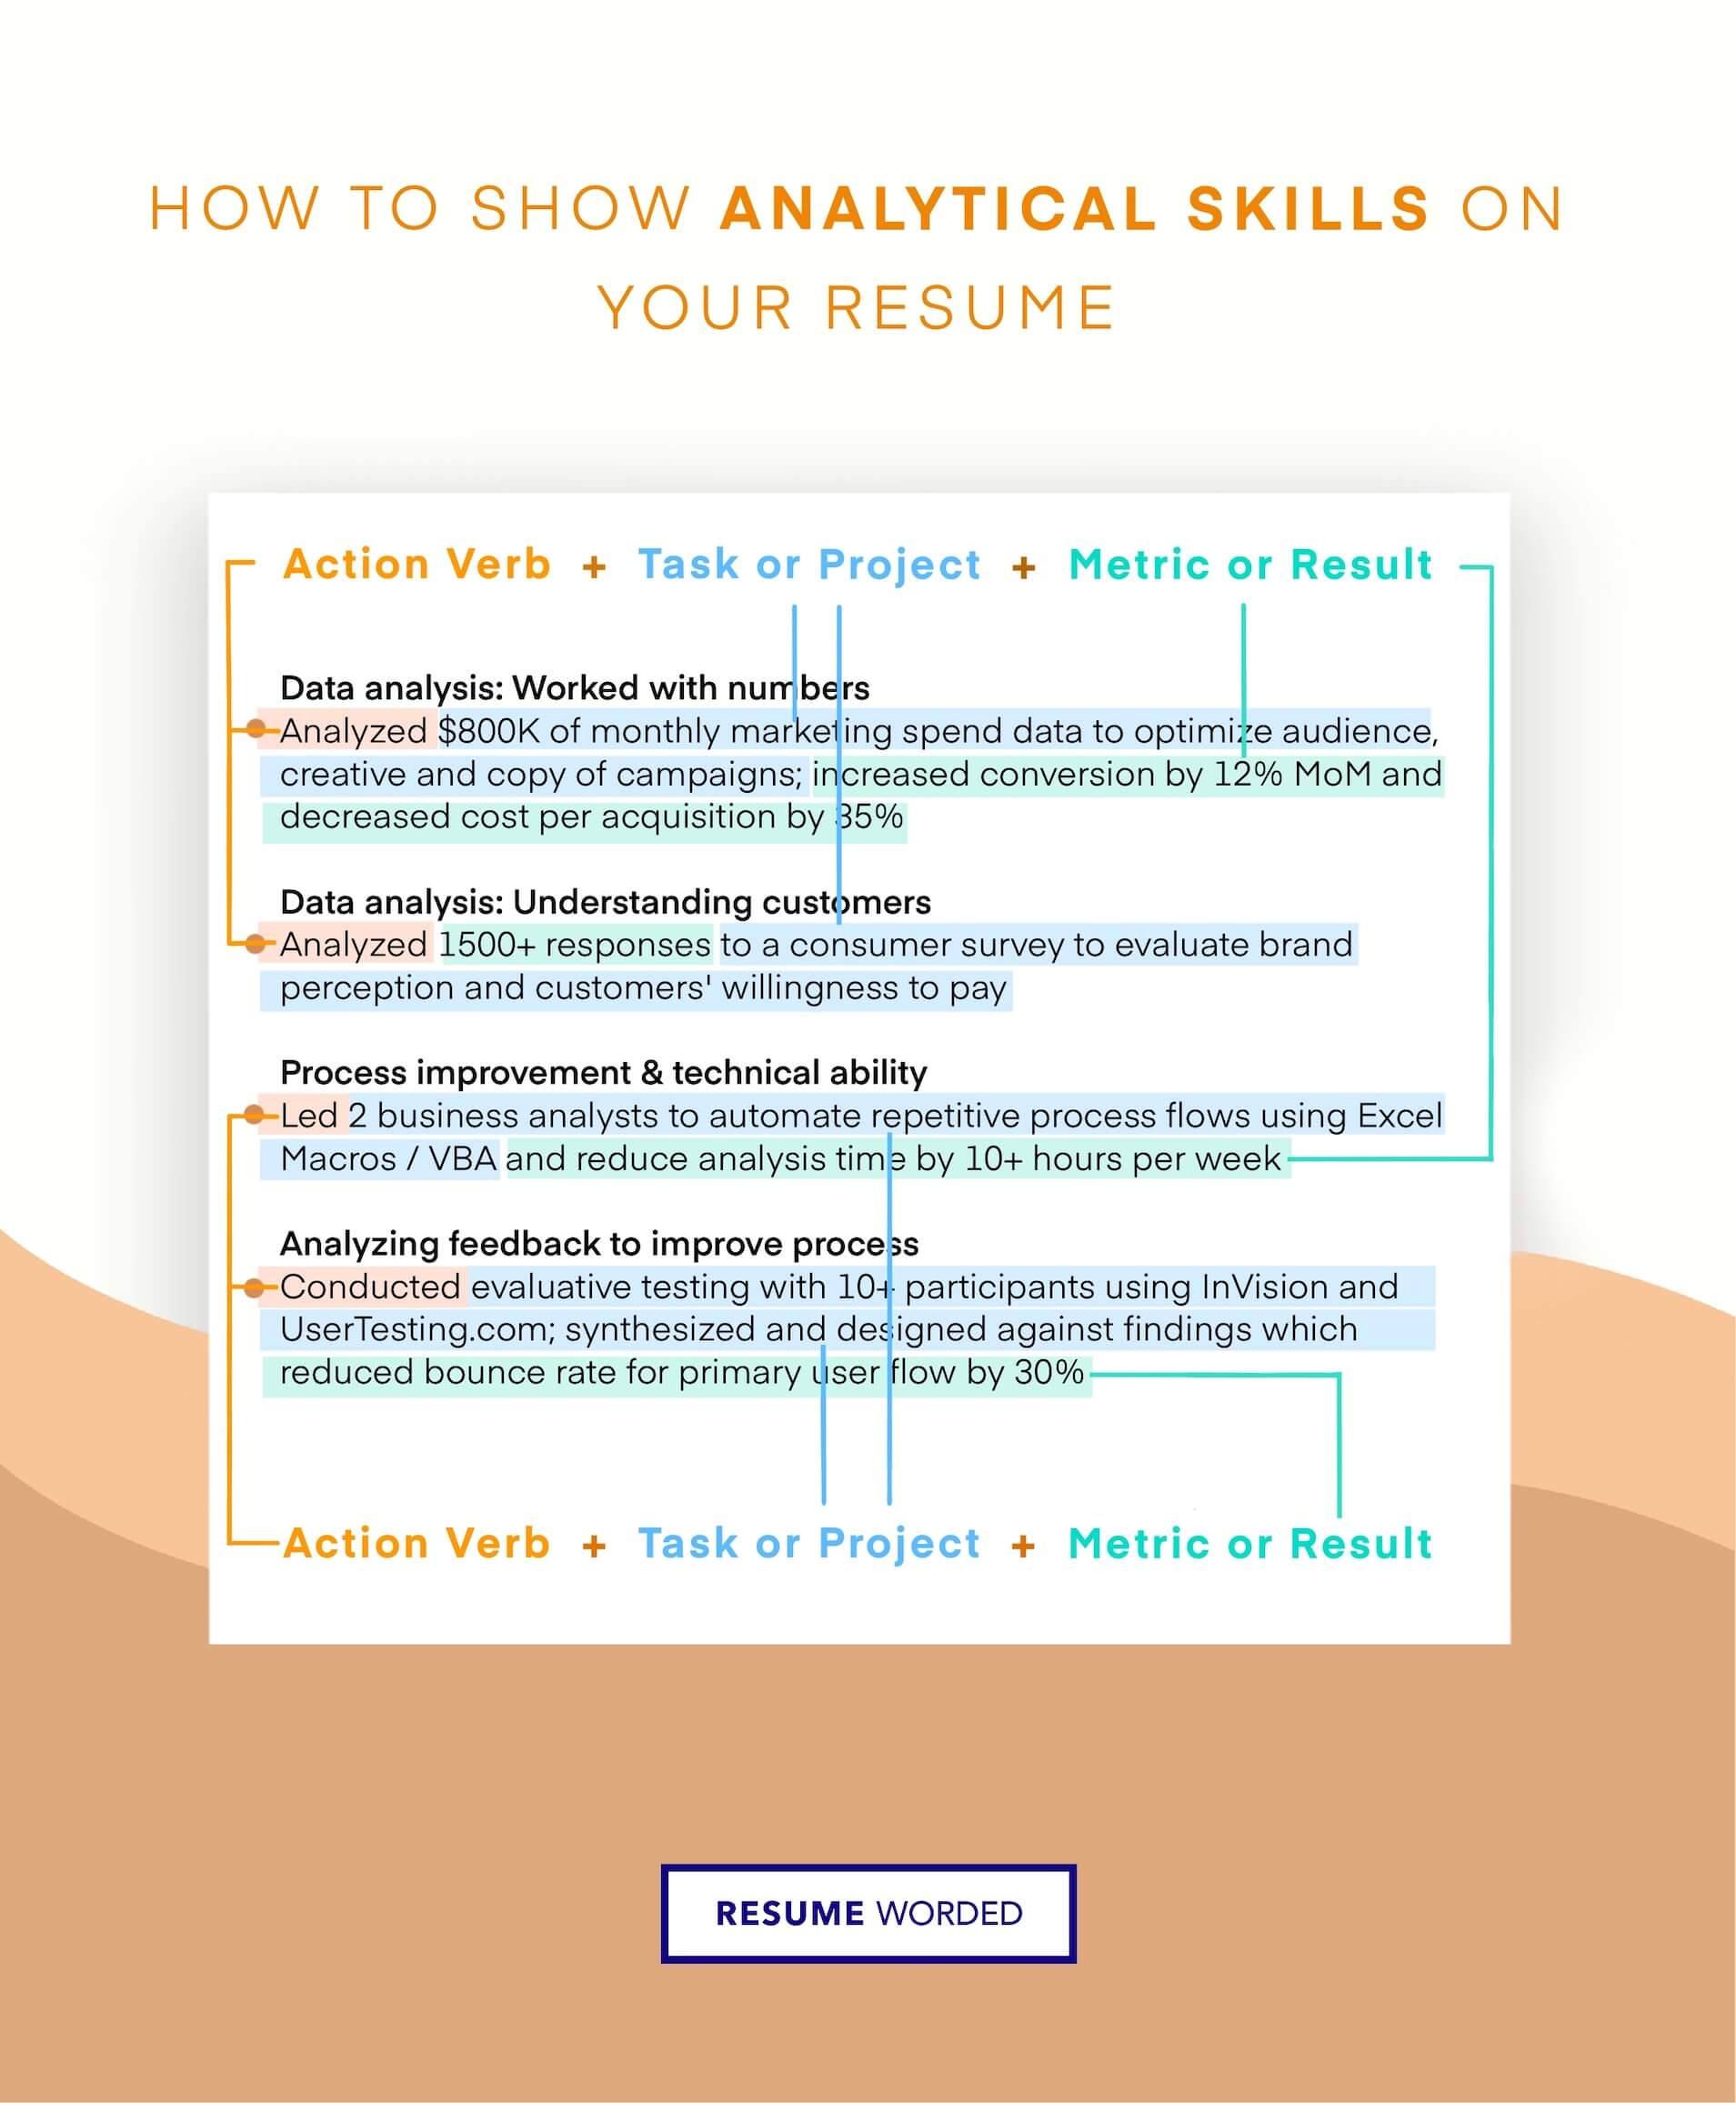 key skills in equity research